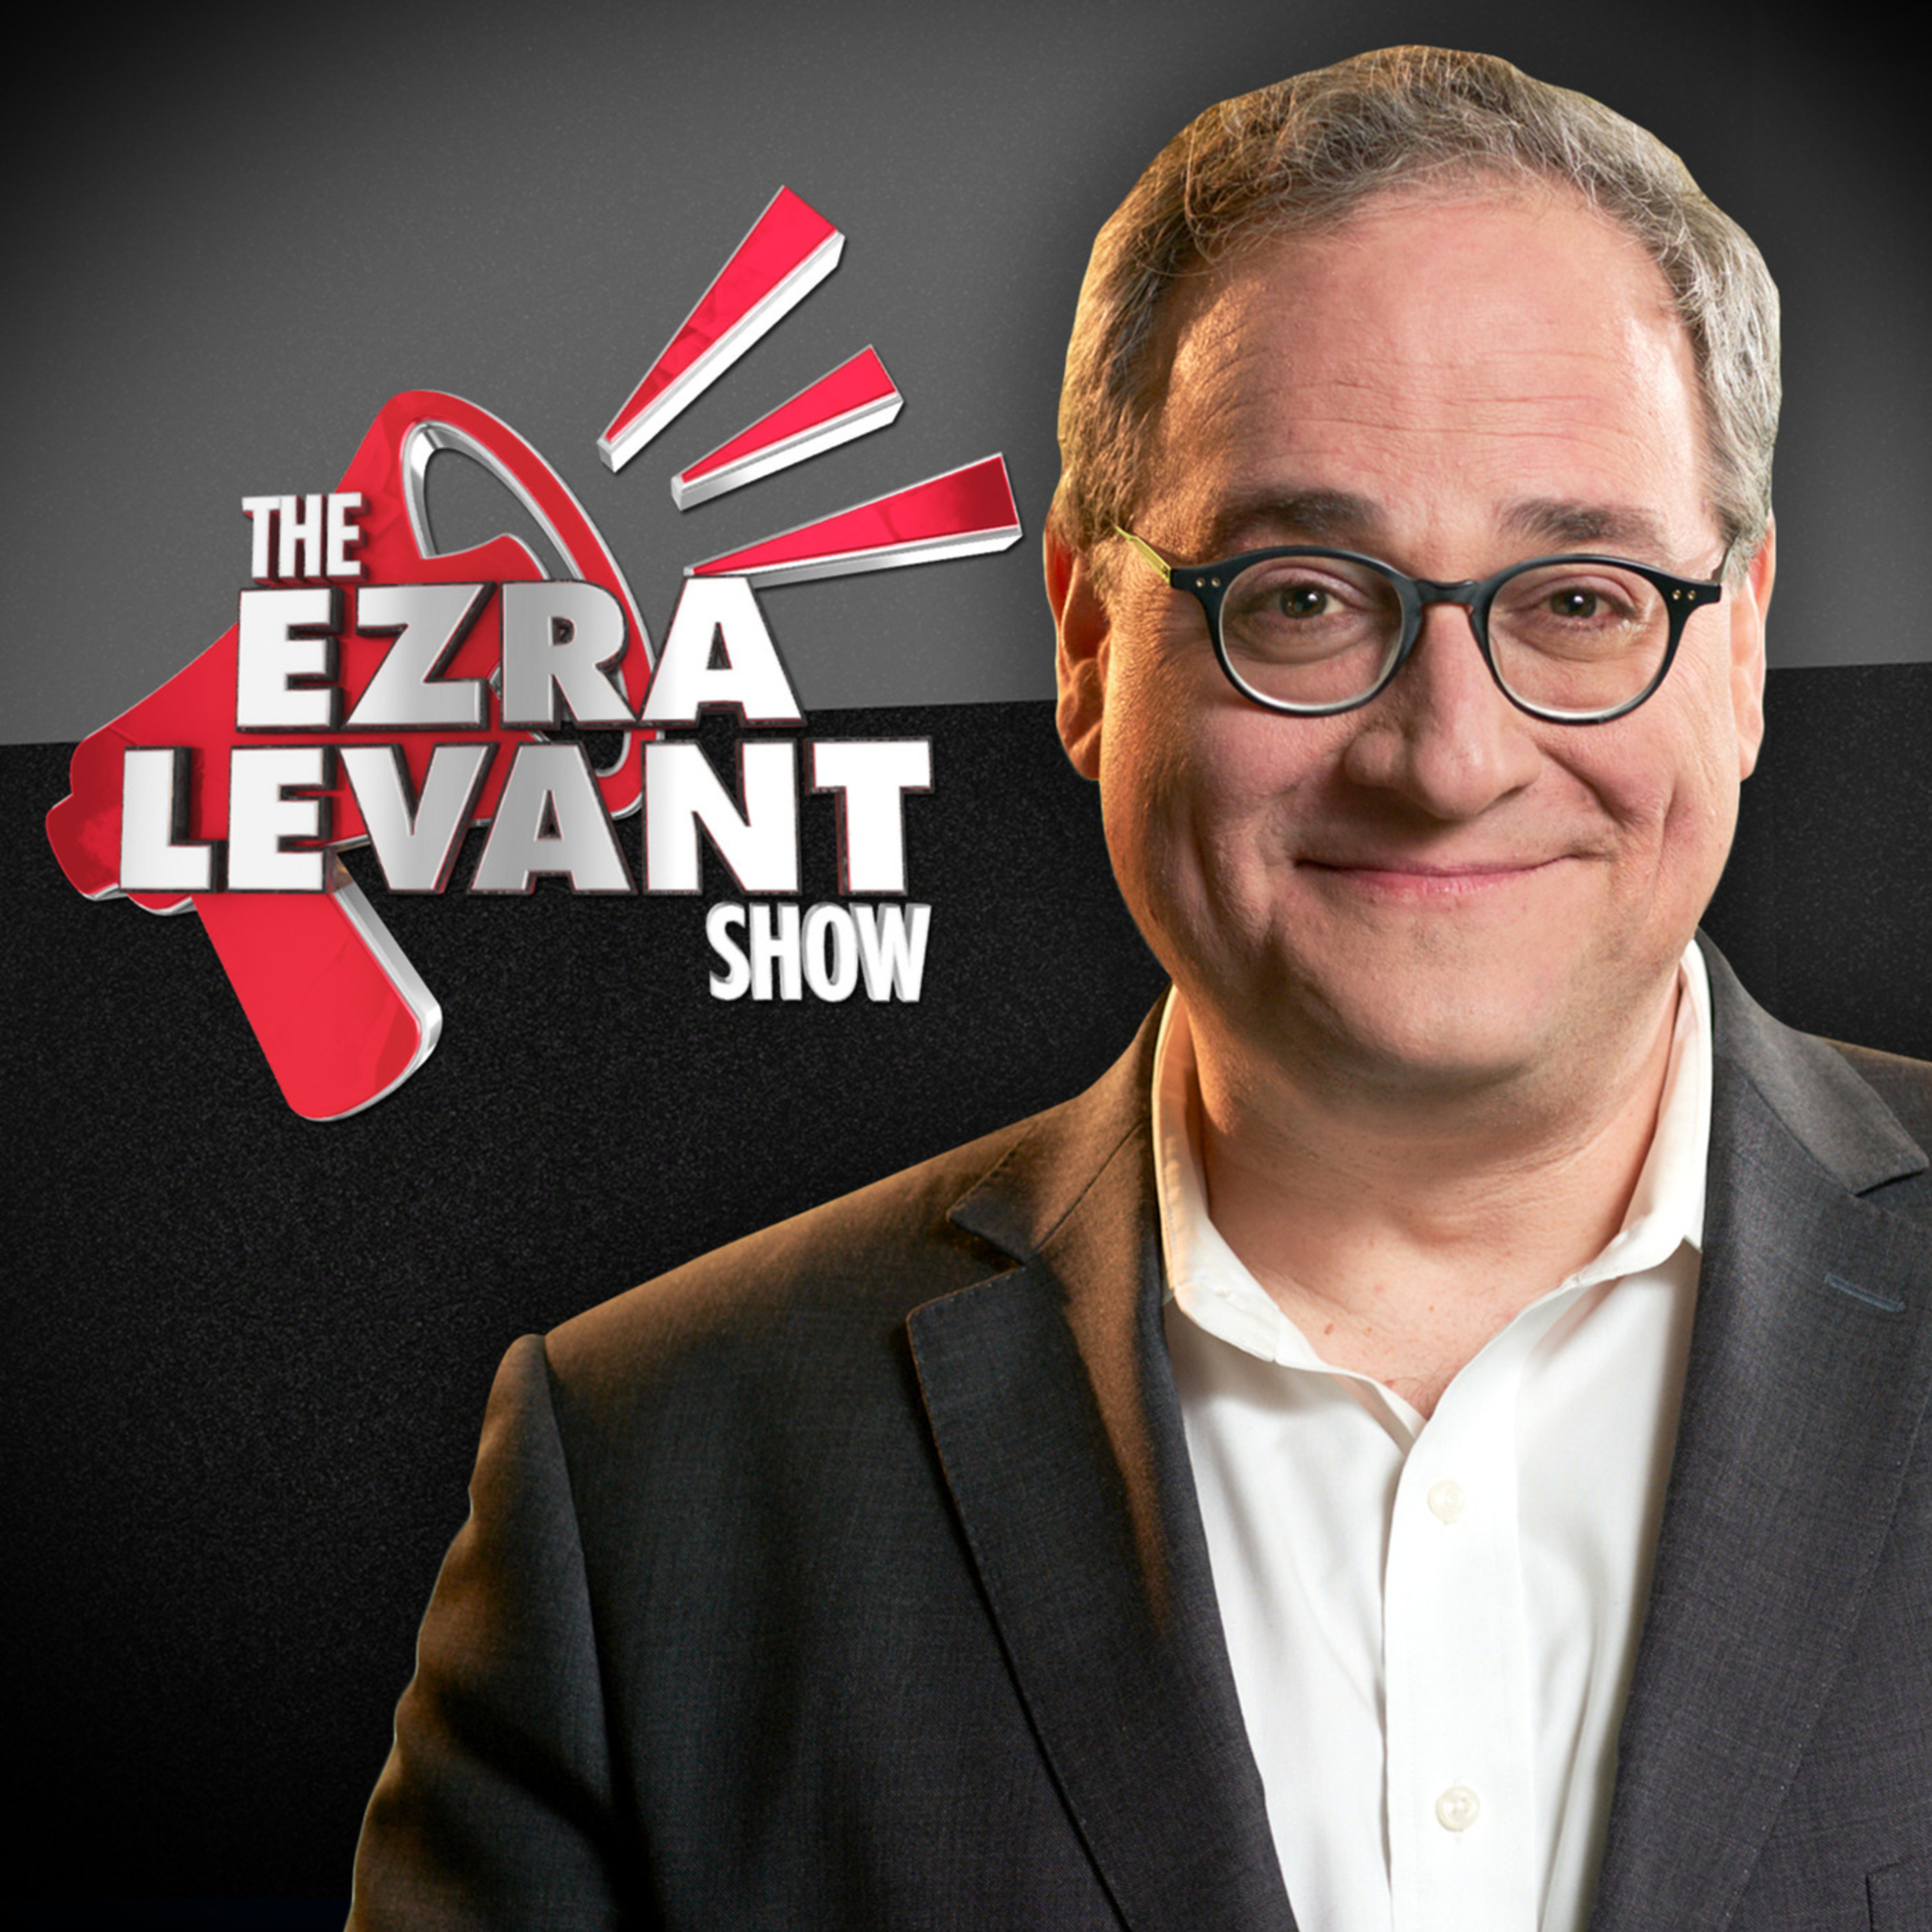 EZRA LEVANT | The grim reality of Israel's fight against extremism: A feature interview with Benjamin Weingarten